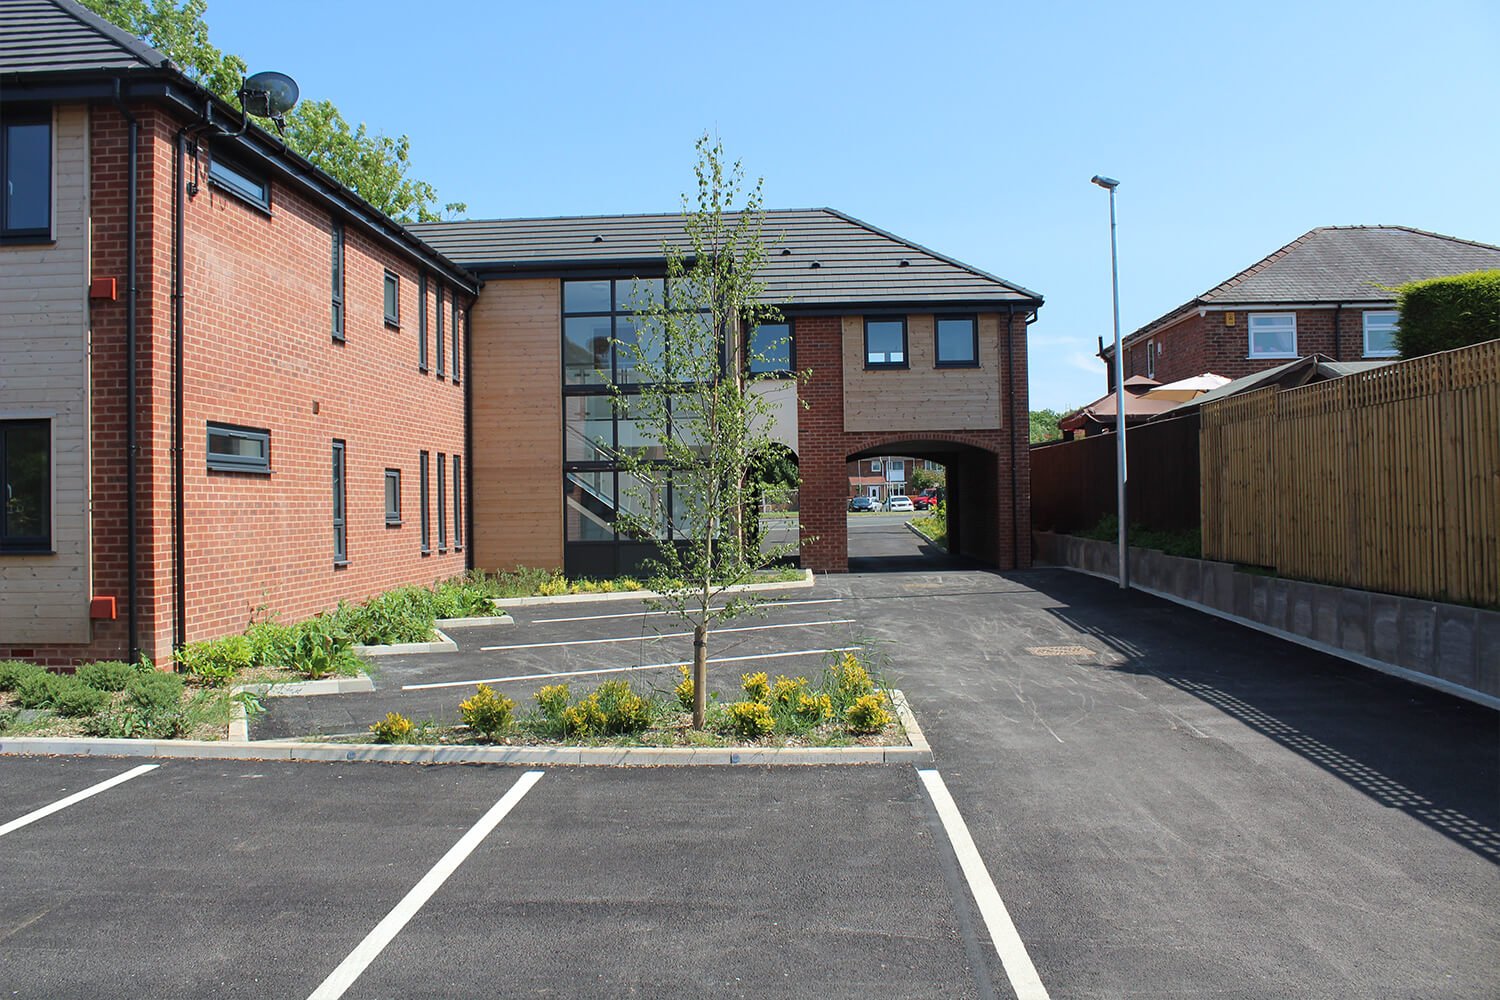 Five Oaks, Knutsford new build apartments